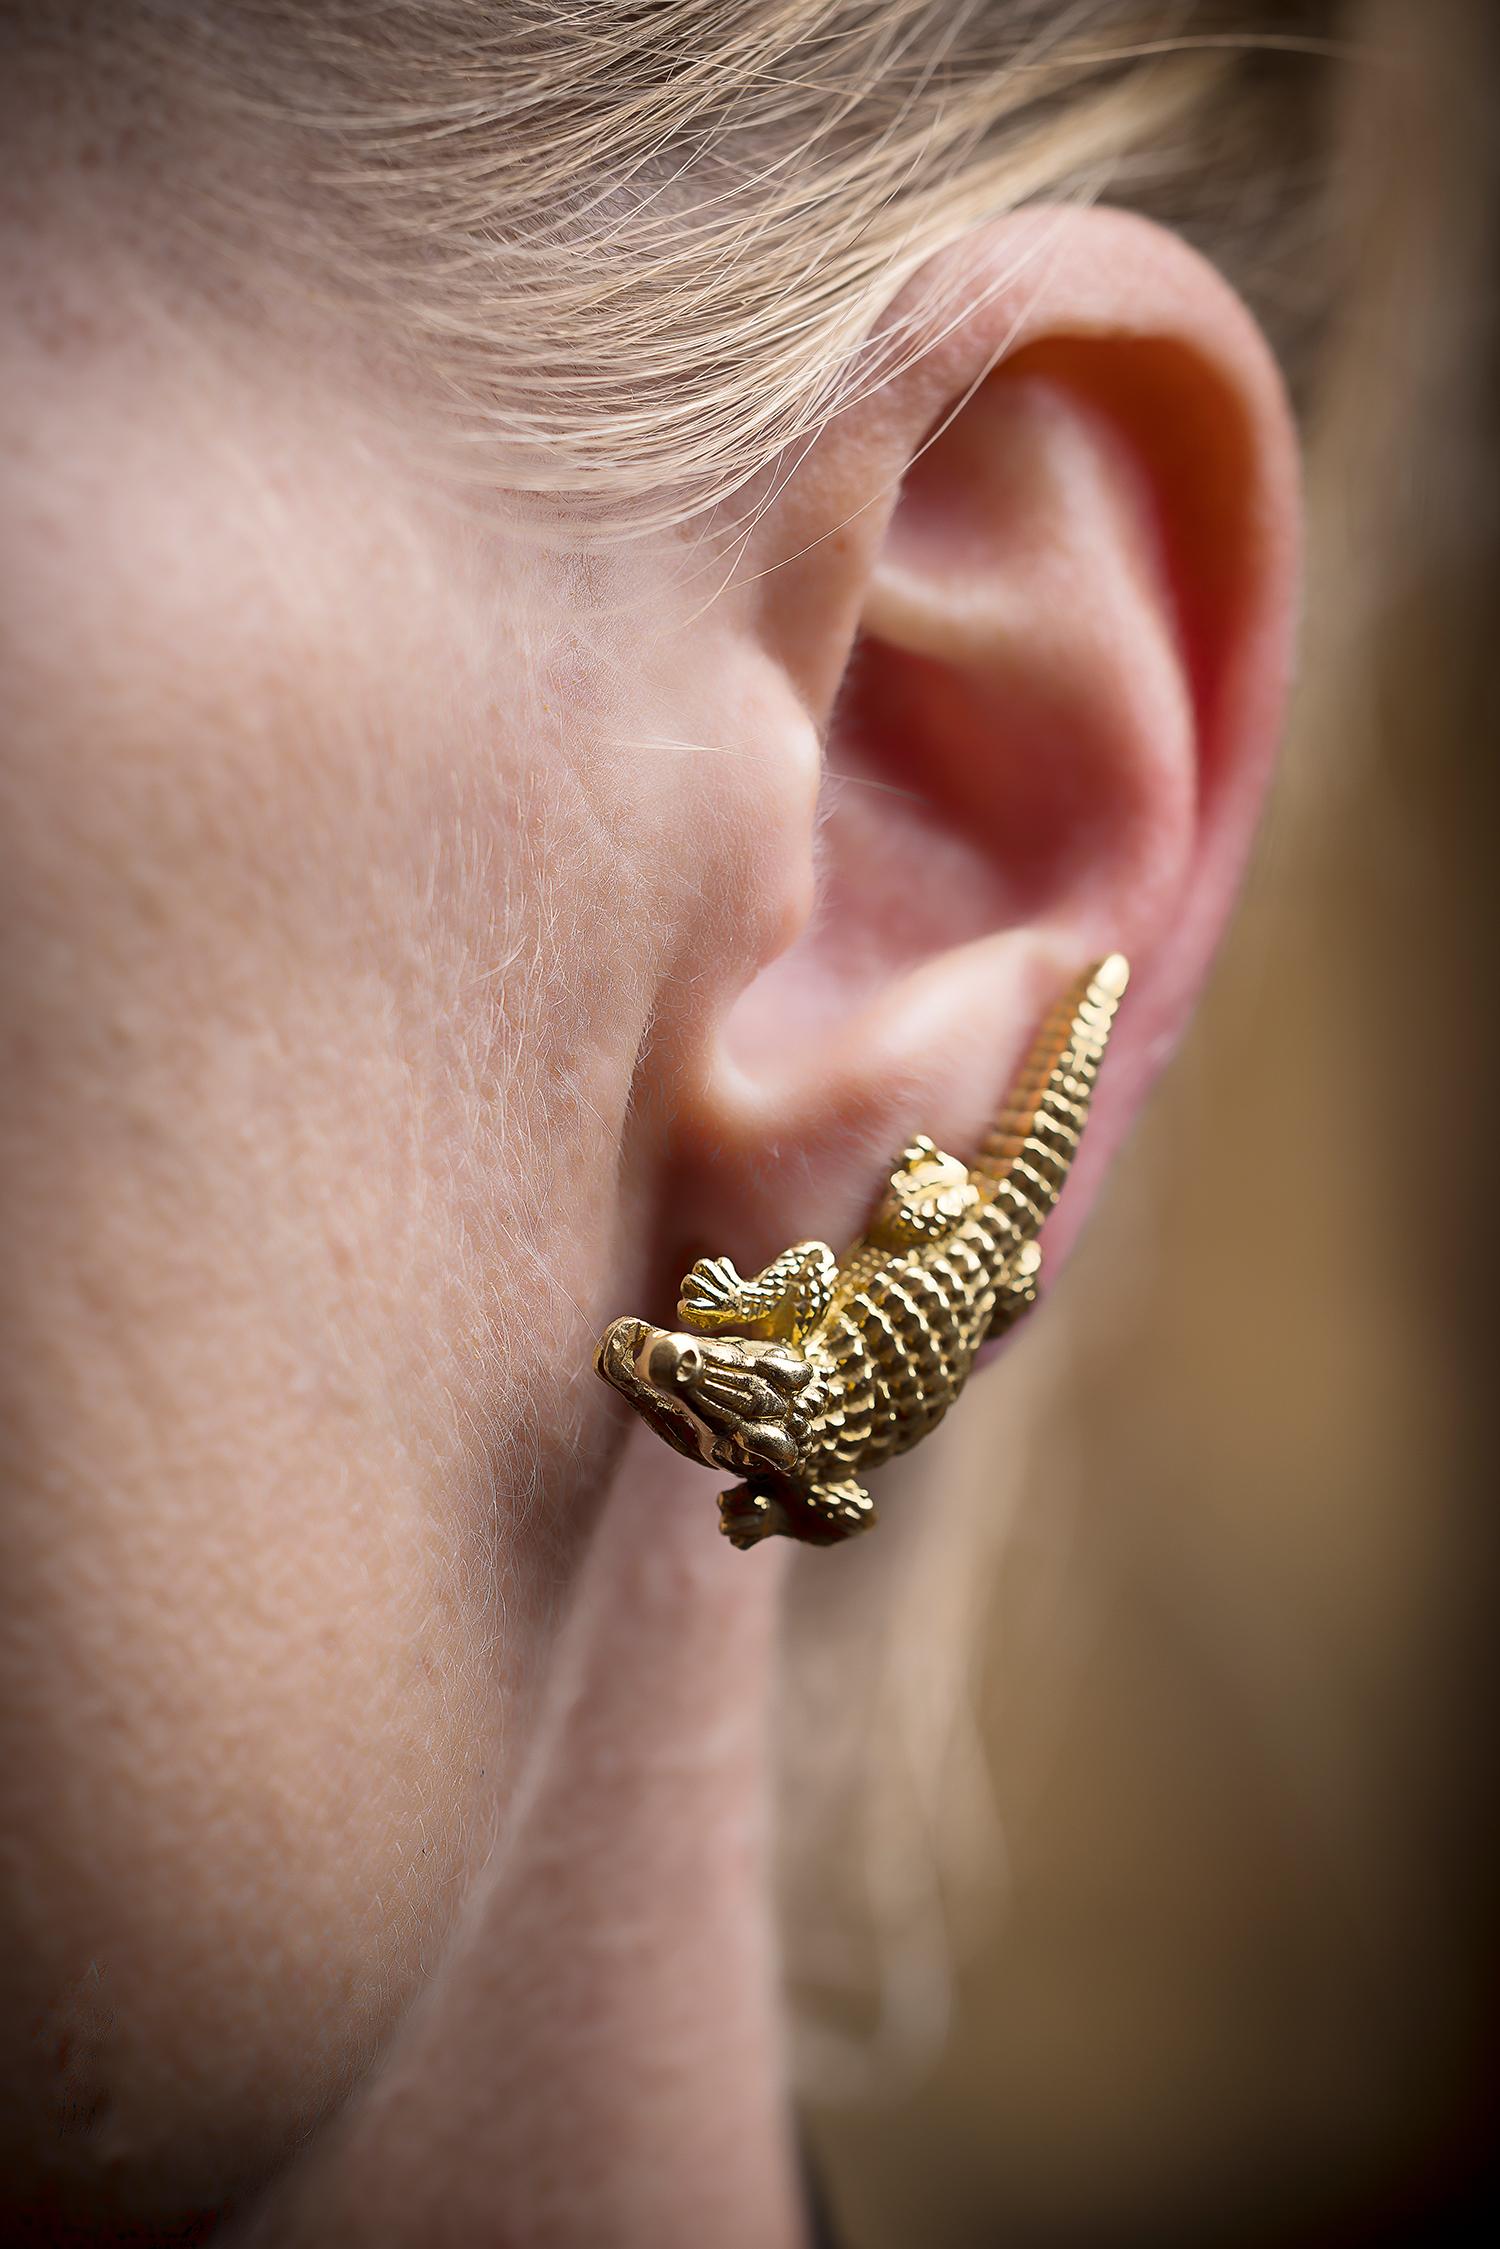 Animalistic beauty and power. A sculpture for the body. 
A pair of alligator shaped gold earrings.  Unapologetic and statement making!

18K gold. 3,5 cm. 18,4 gram

